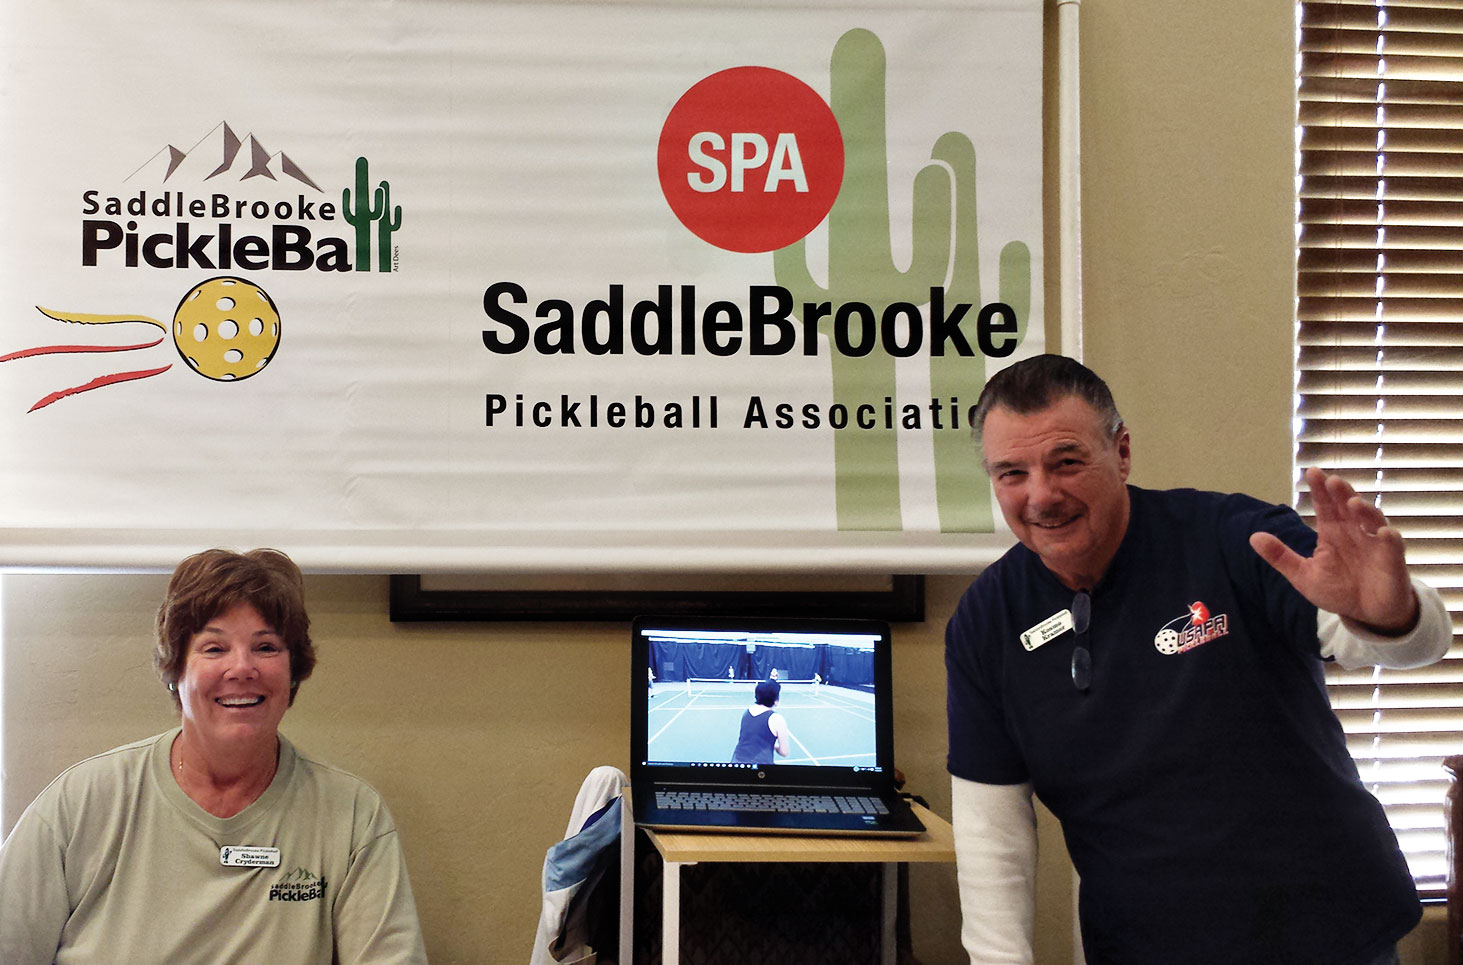 Shawne Cryderman and Bob “Kosmo” Kramer welcome SaddleBrooke residents to join SPA during the RAC fair.